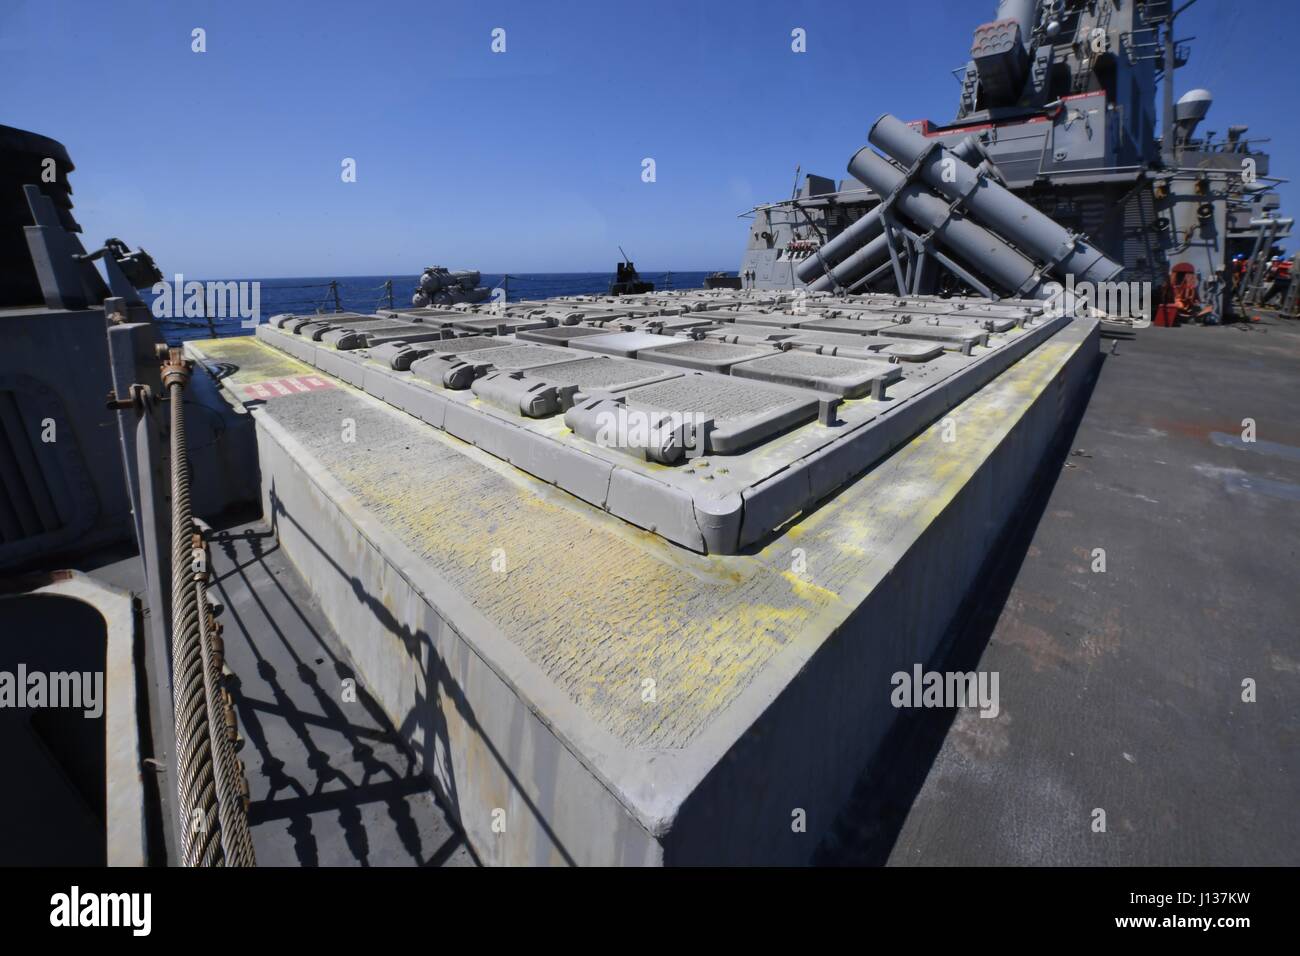 170407-N-JI086-355  MEDITERRANEAN SEA (April 7, 2017) The aft launcher aboard the guided-missile destroyer USS Porter (DDG 78), April 7, 2017. Porter, forward-deployed to Rota, Spain, is conducting naval operations in the U.S. 6th Fleet area of operations in support of U.S. national security interests in Europe. (U.S. Navy photo by Mass Communication Specialist 3rd Class Ford Williams/Released) Stock Photo